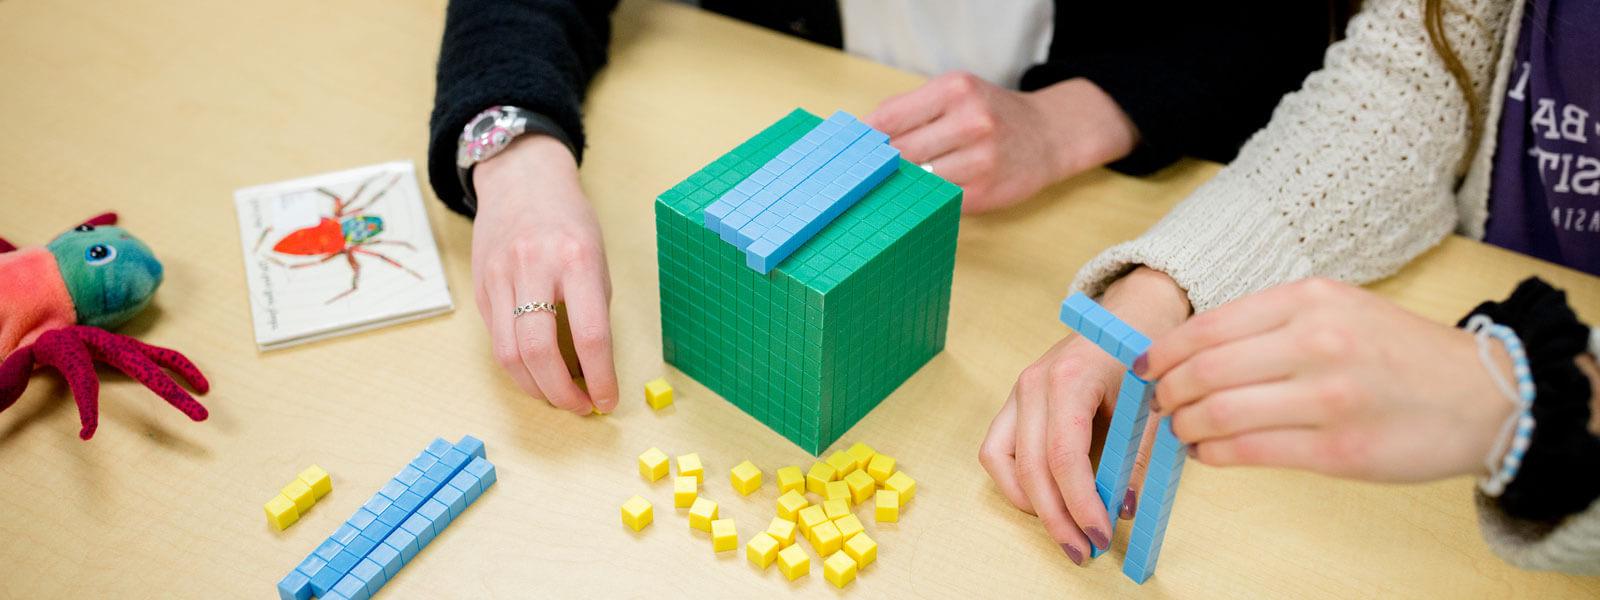 close-up of students' hands as they work with math manipulative blocks